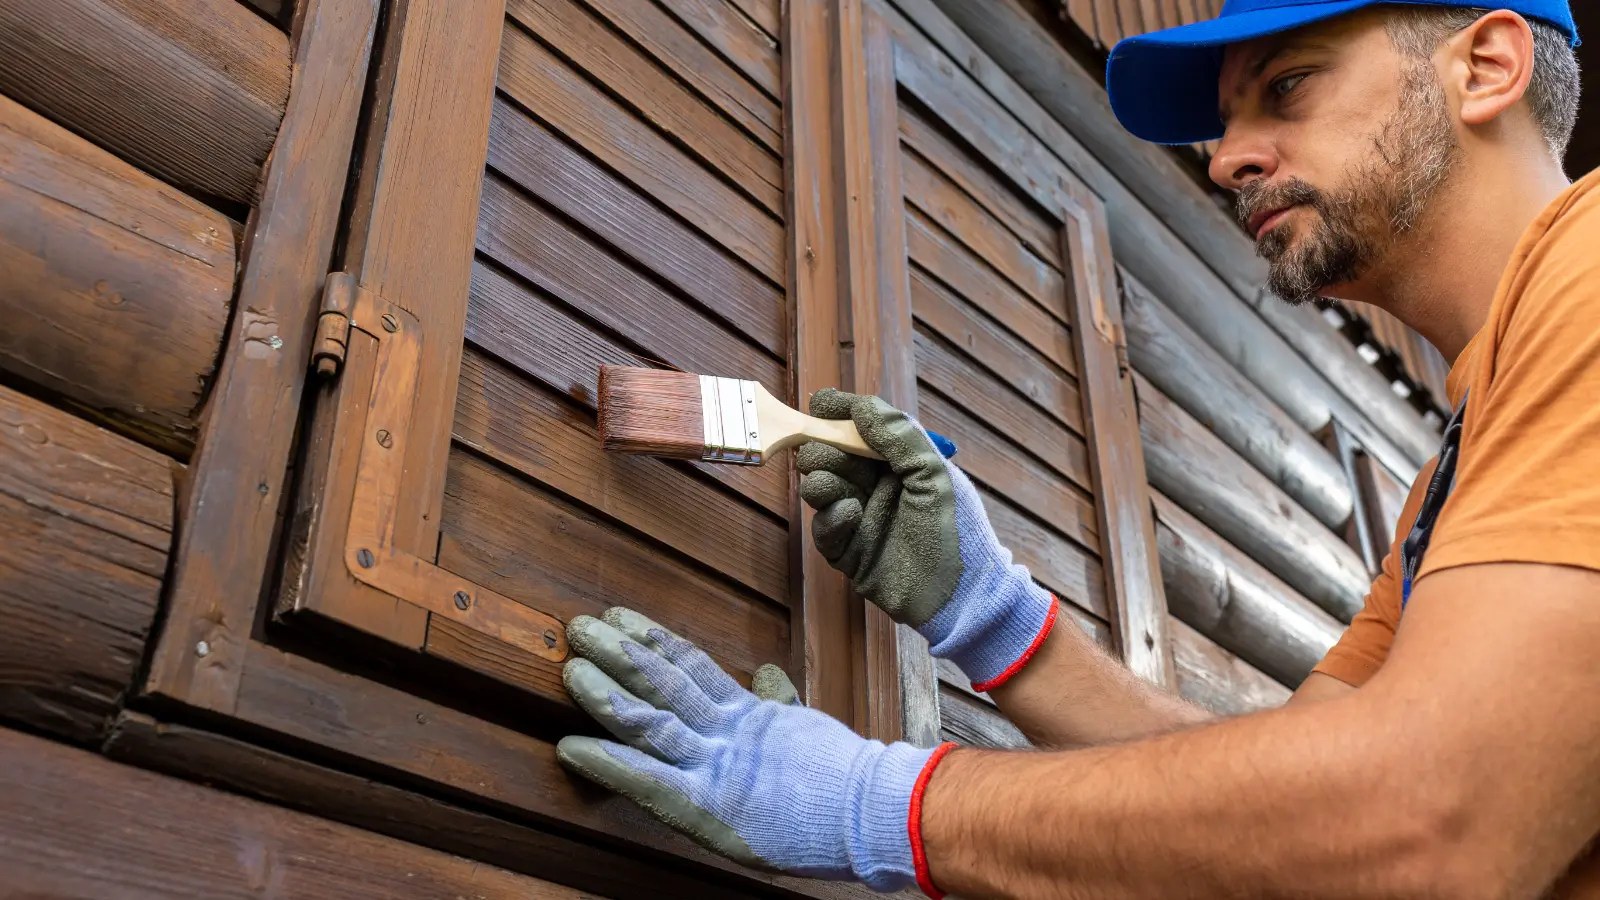 A man is painting the shutters of a wooden house.